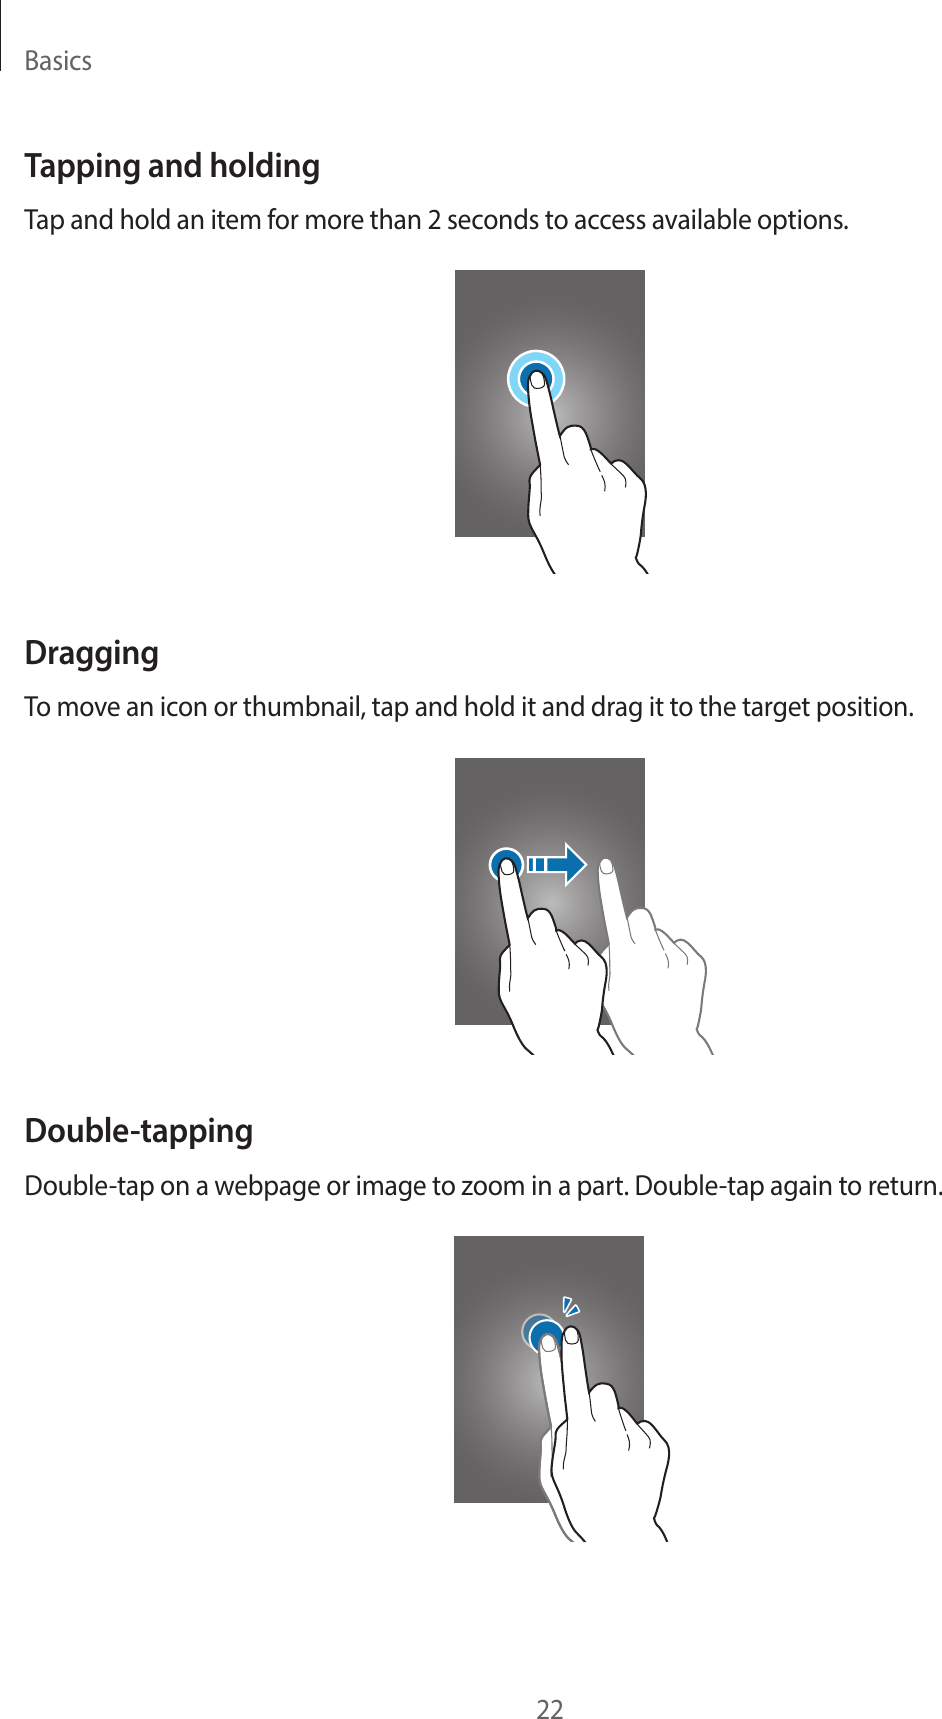 Basics22Tapping and holdingTap and hold an item for more than 2 seconds to access available options.DraggingTo move an icon or thumbnail, tap and hold it and drag it to the target position.Double-tappingDouble-tap on a webpage or image to zoom in a part. Double-tap again to return.